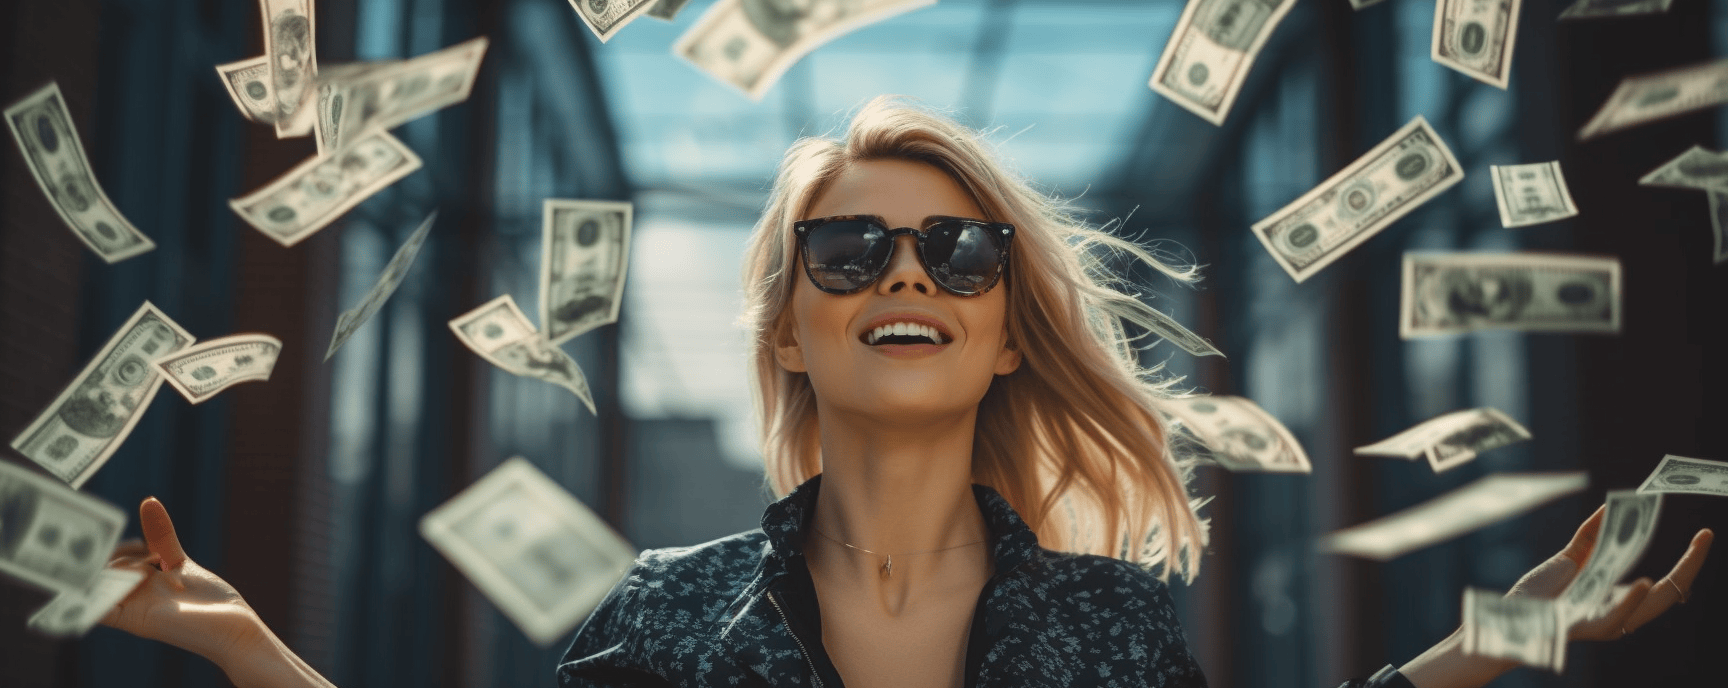 Attractive woman making boat loads of cash